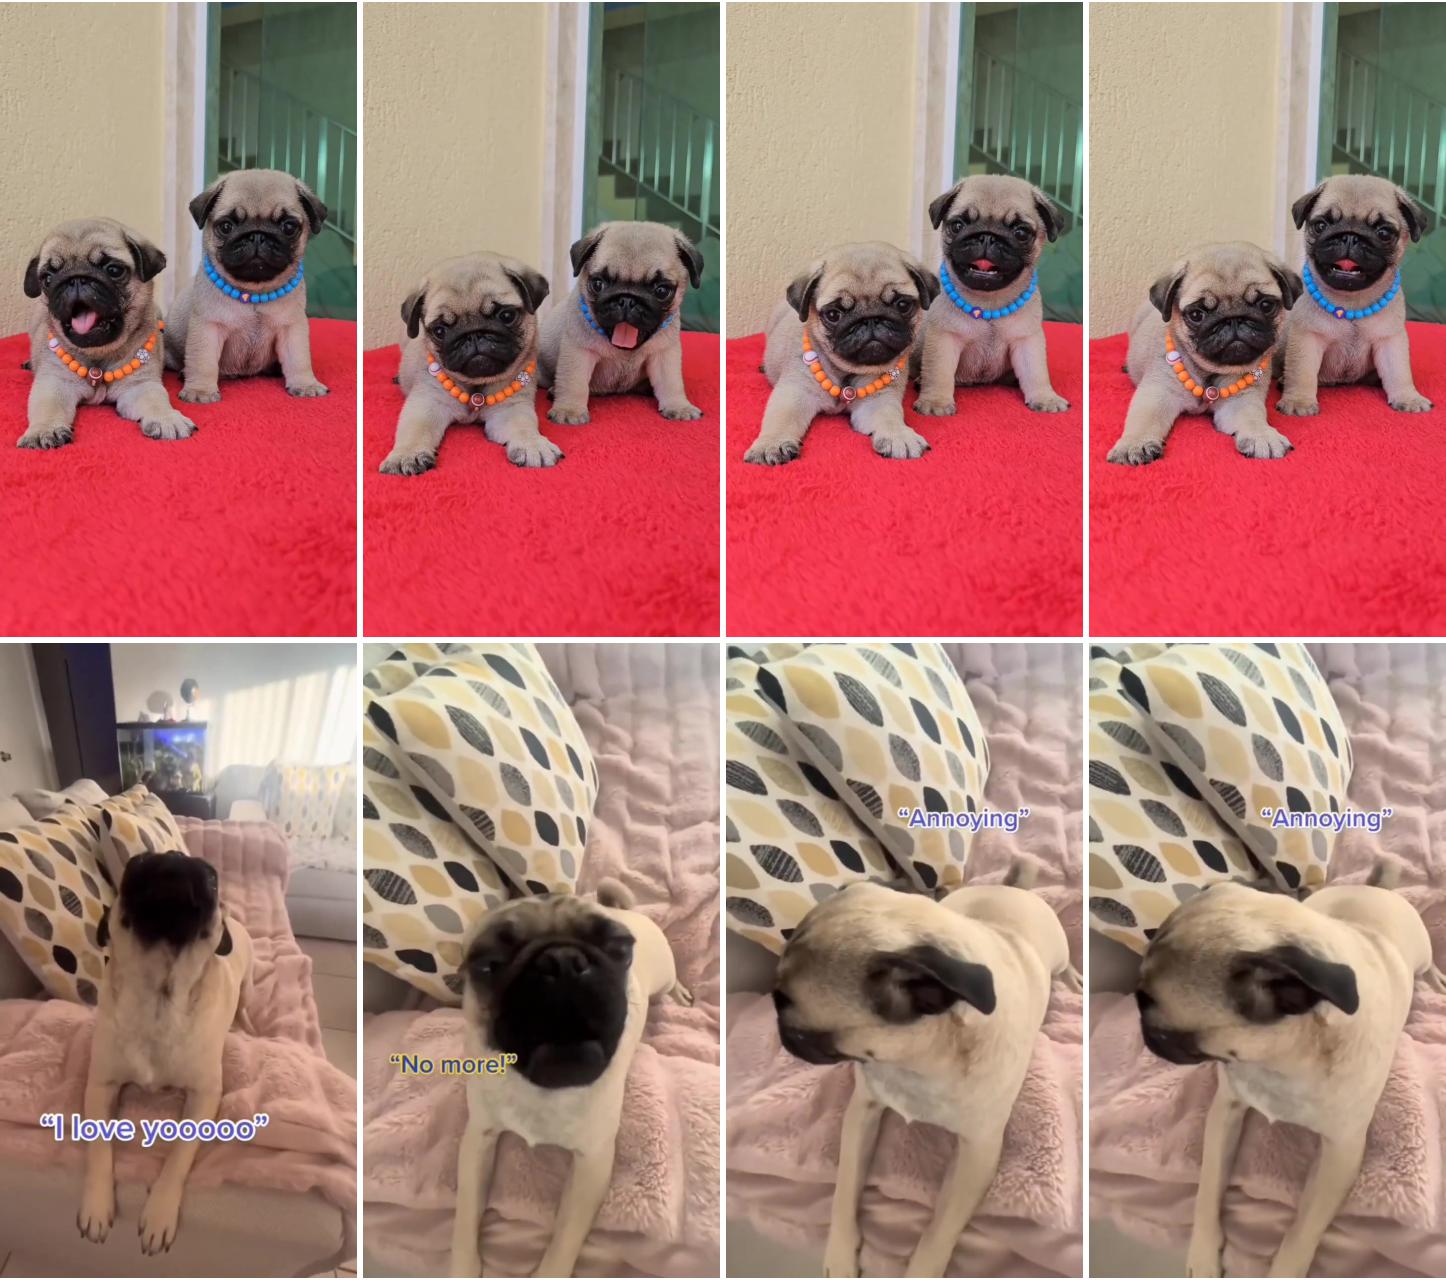 Yawning pug puppies - too cute to resist ; adorable pug puppy funny video 